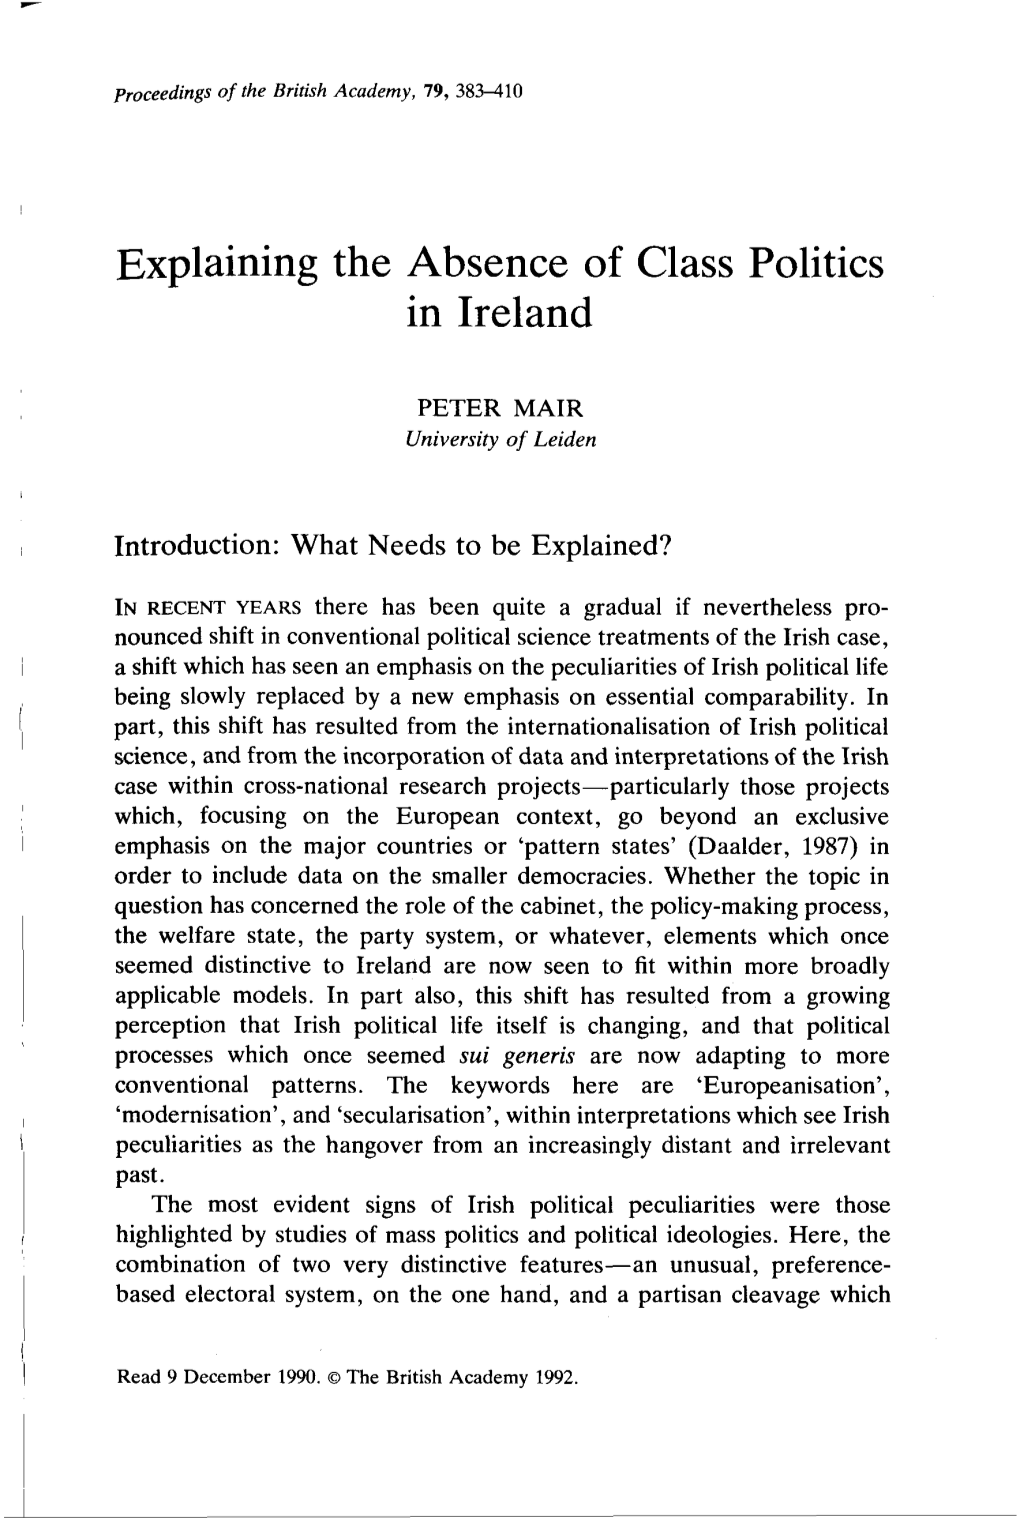 Explaining the Absence of Class Politics in Ireland